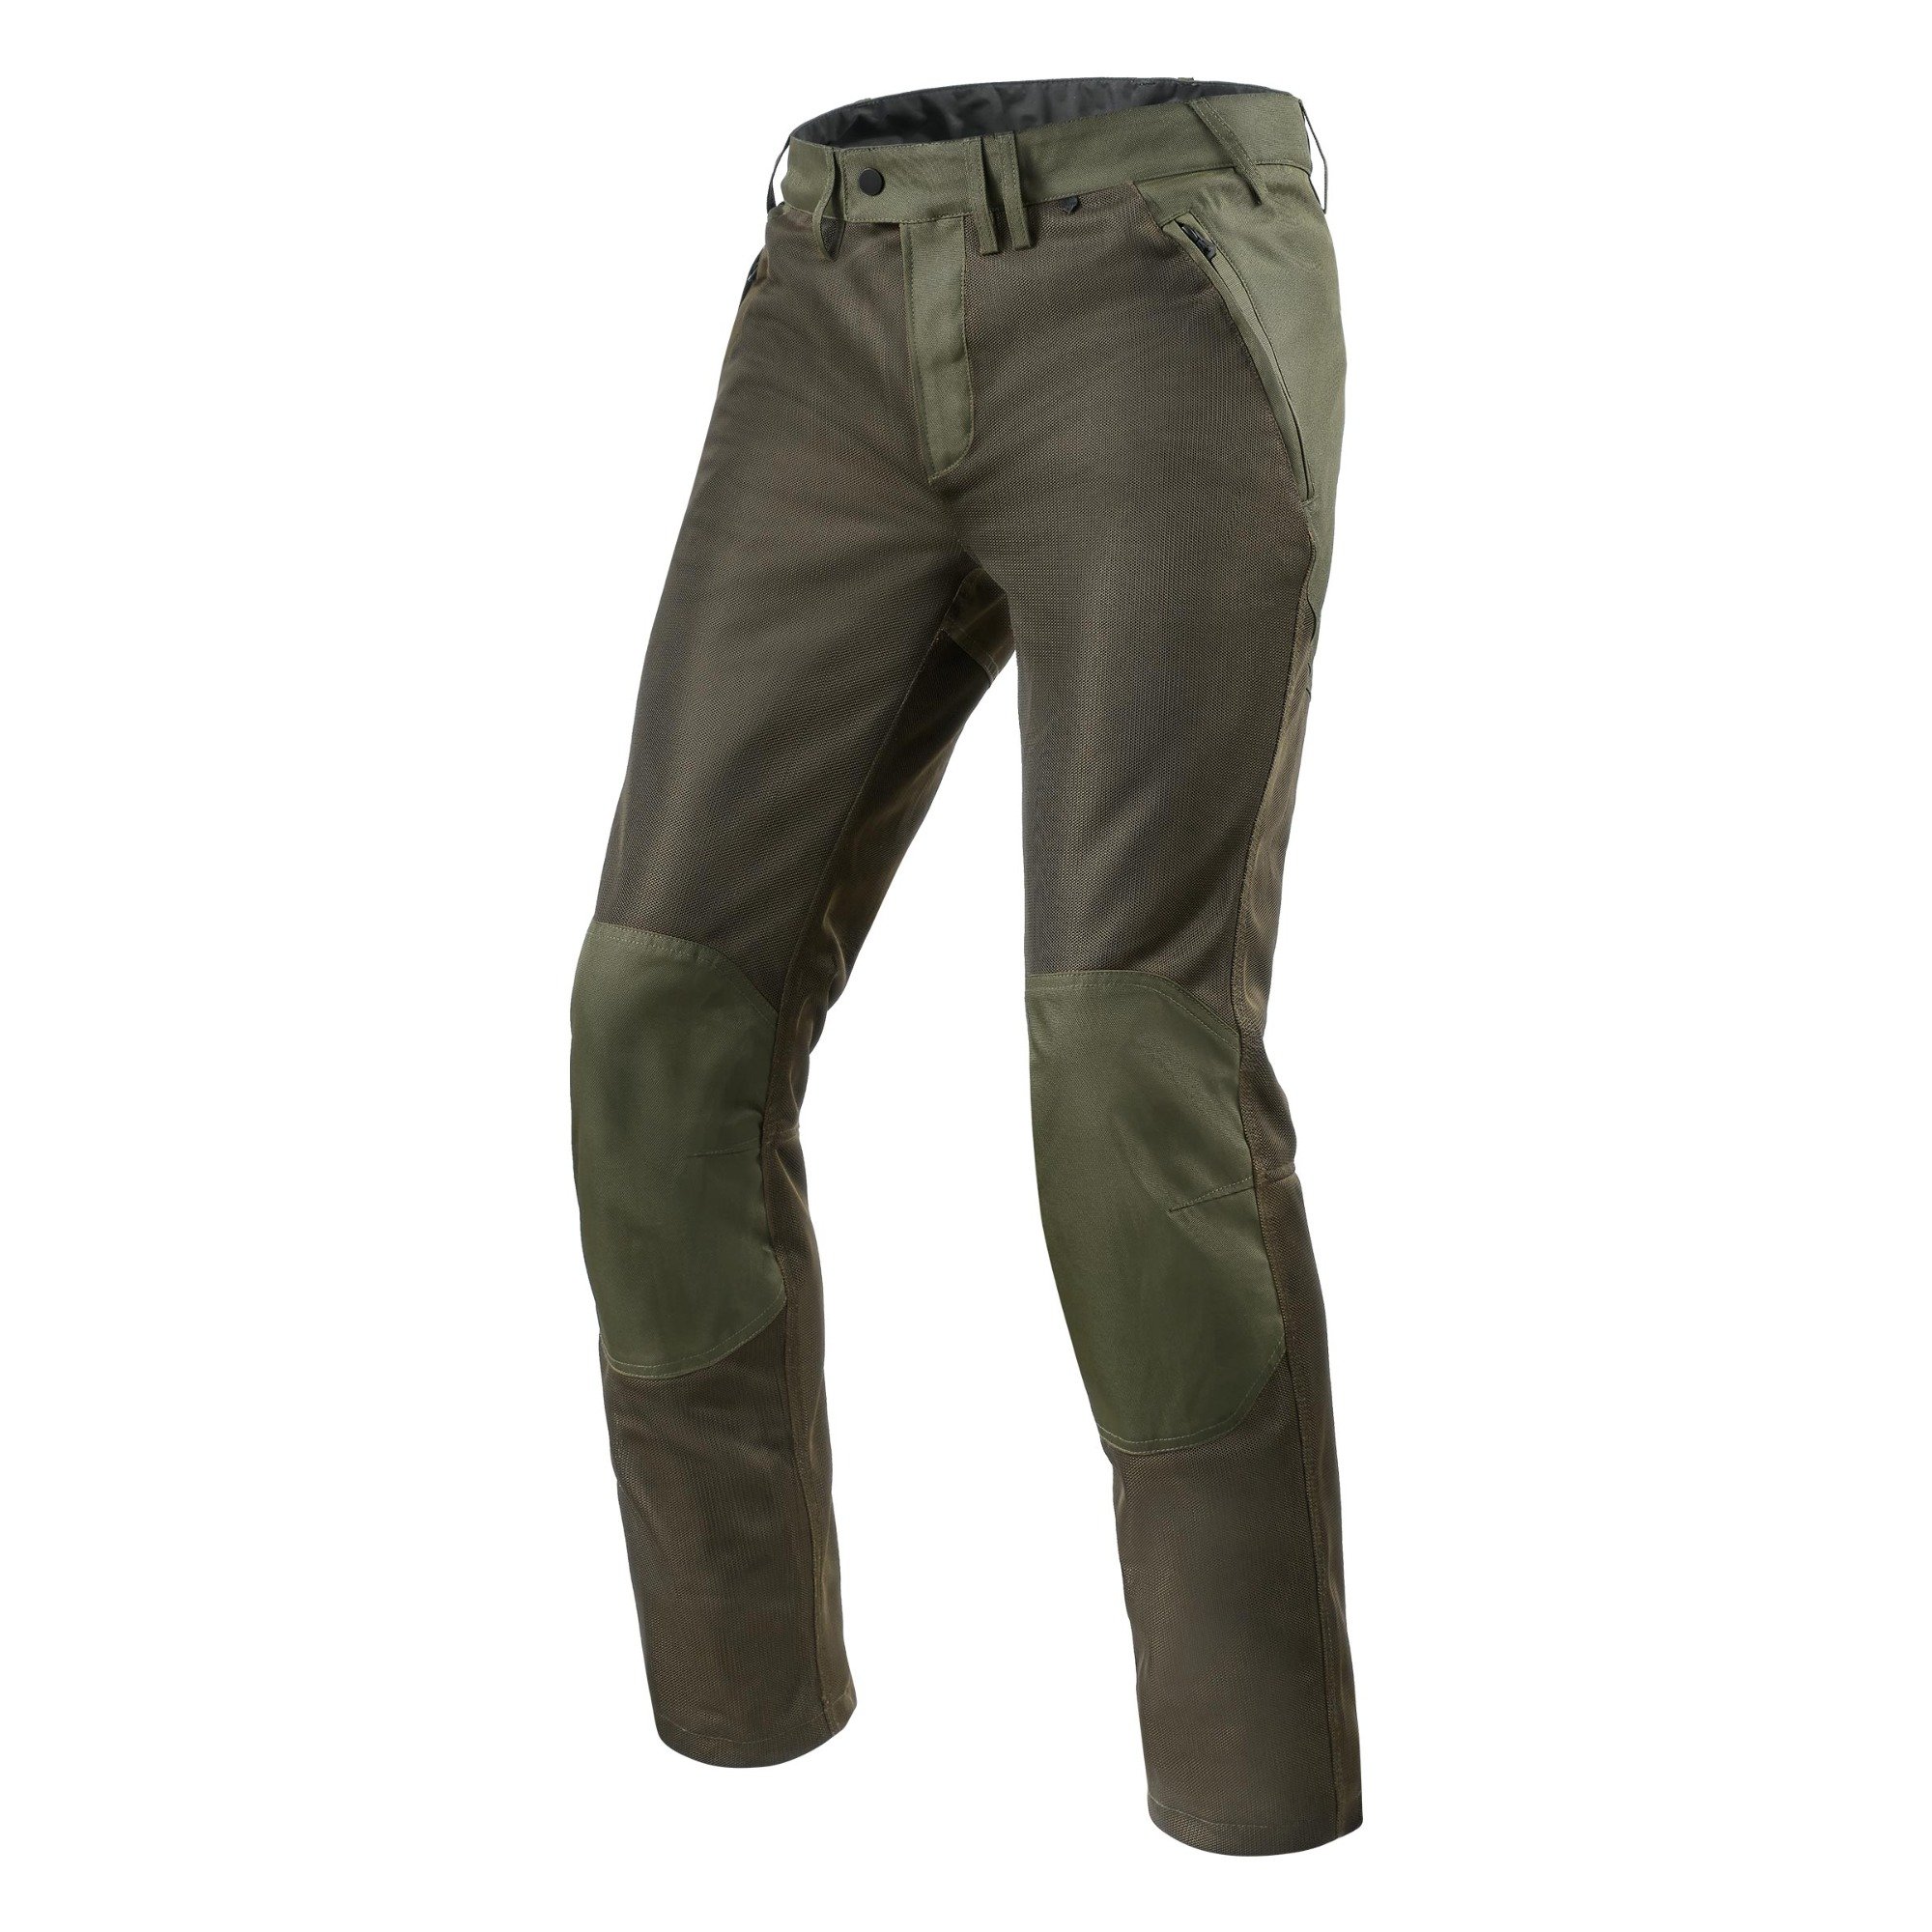 Image of REV'IT! Trousers Eclipse Dark Green Short Size S ID 8700001334983